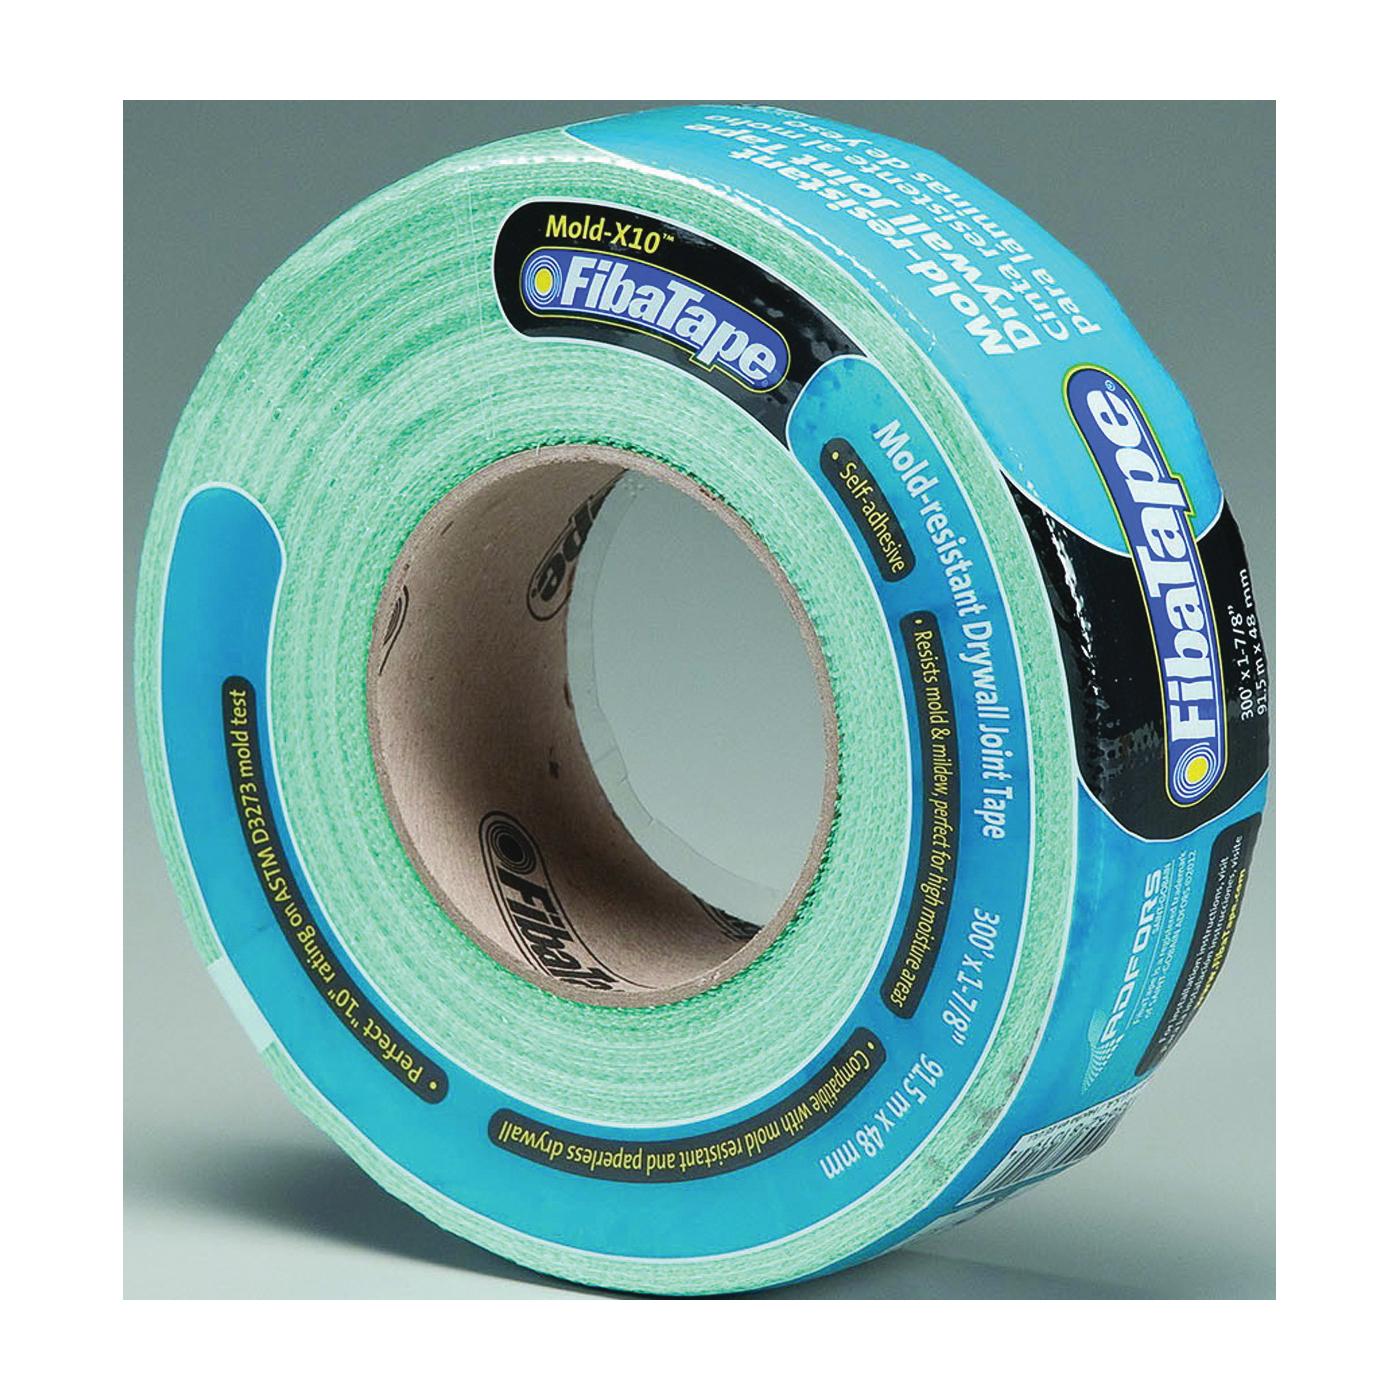 Mold-X10 FDW8664-U Drywall Tape Wrap, 300 ft L, 1-7/8 in W, 0.3 mm Thick, Green